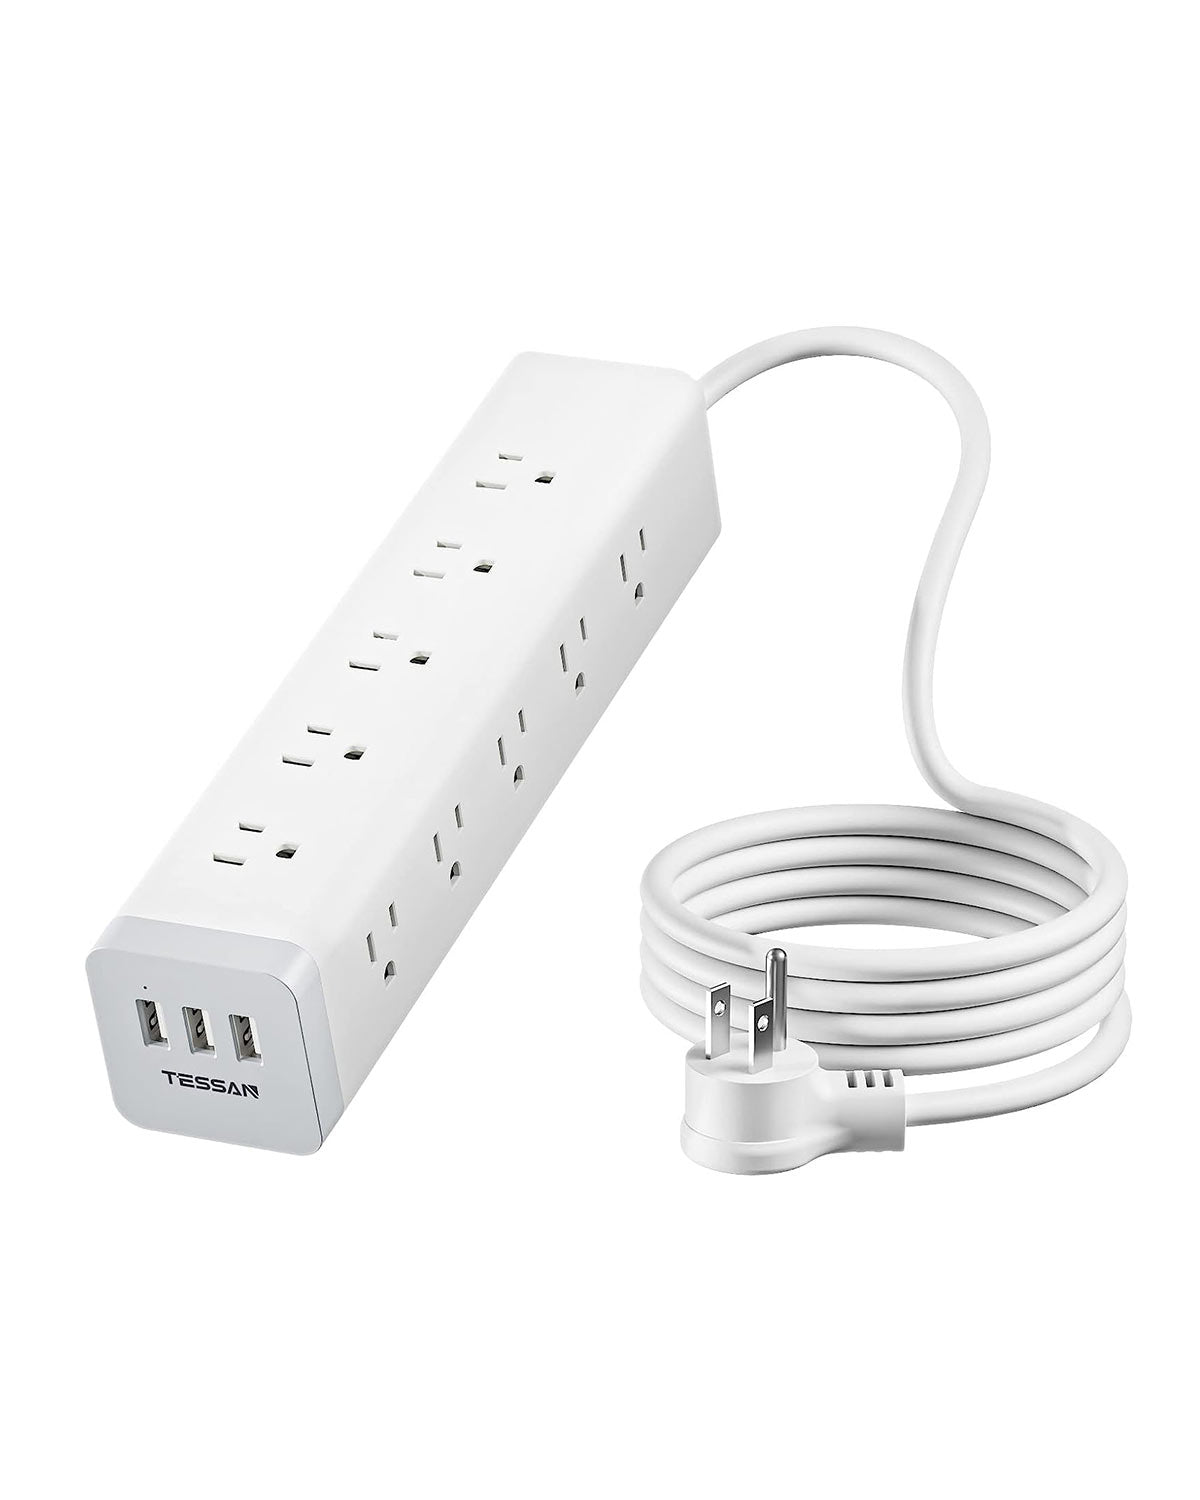 TESSAN Surge Protector Power Strip with 15 Outlets and 3 USB Ports